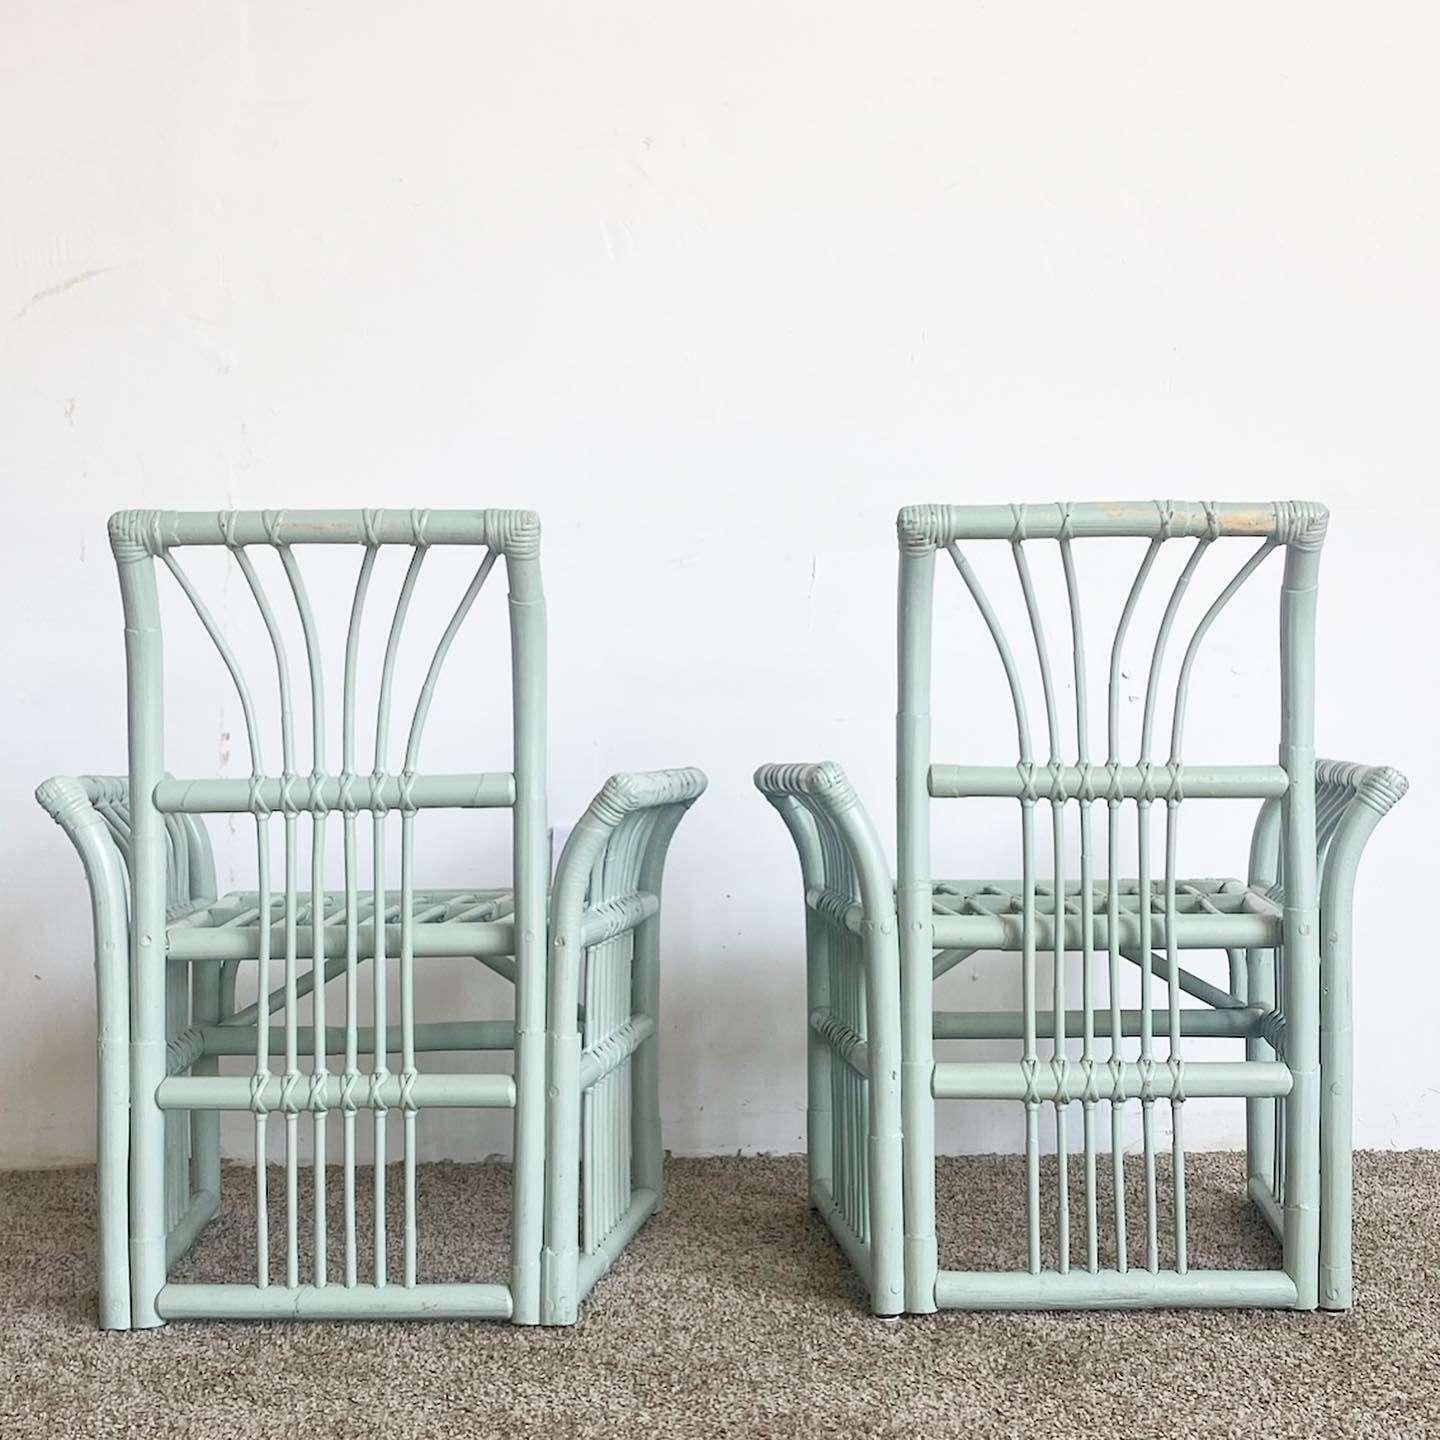 Late 20th Century Boho Chic Mint Green Bamboo Rattan Dining Set - 5 Pieces For Sale